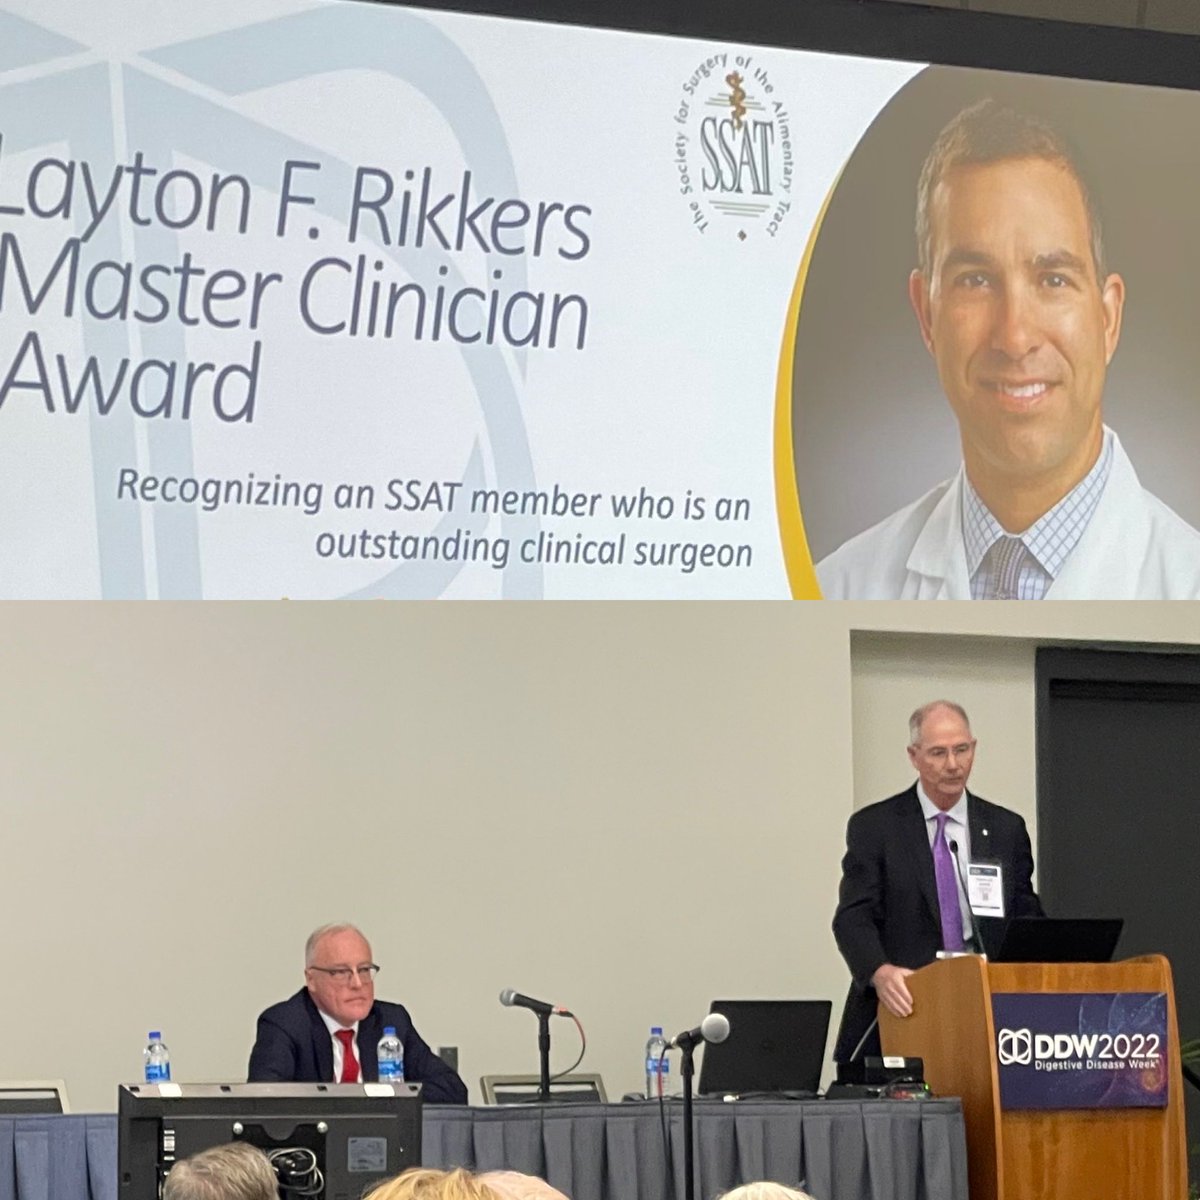 Congratulations to Dr ⁦@joncgould⁩ ⁦@MCWSurgery⁩ winning ⁦@SSATNews⁩ Master Clinician Award named for Dr Rikkers beloved Chair emeritus ⁦@WiscSurgery⁩ ! Also: ⁦@VautheyMD⁩ & ⁦@DougEvans2273⁩ in the same frame giving me fellowship flashbacks!